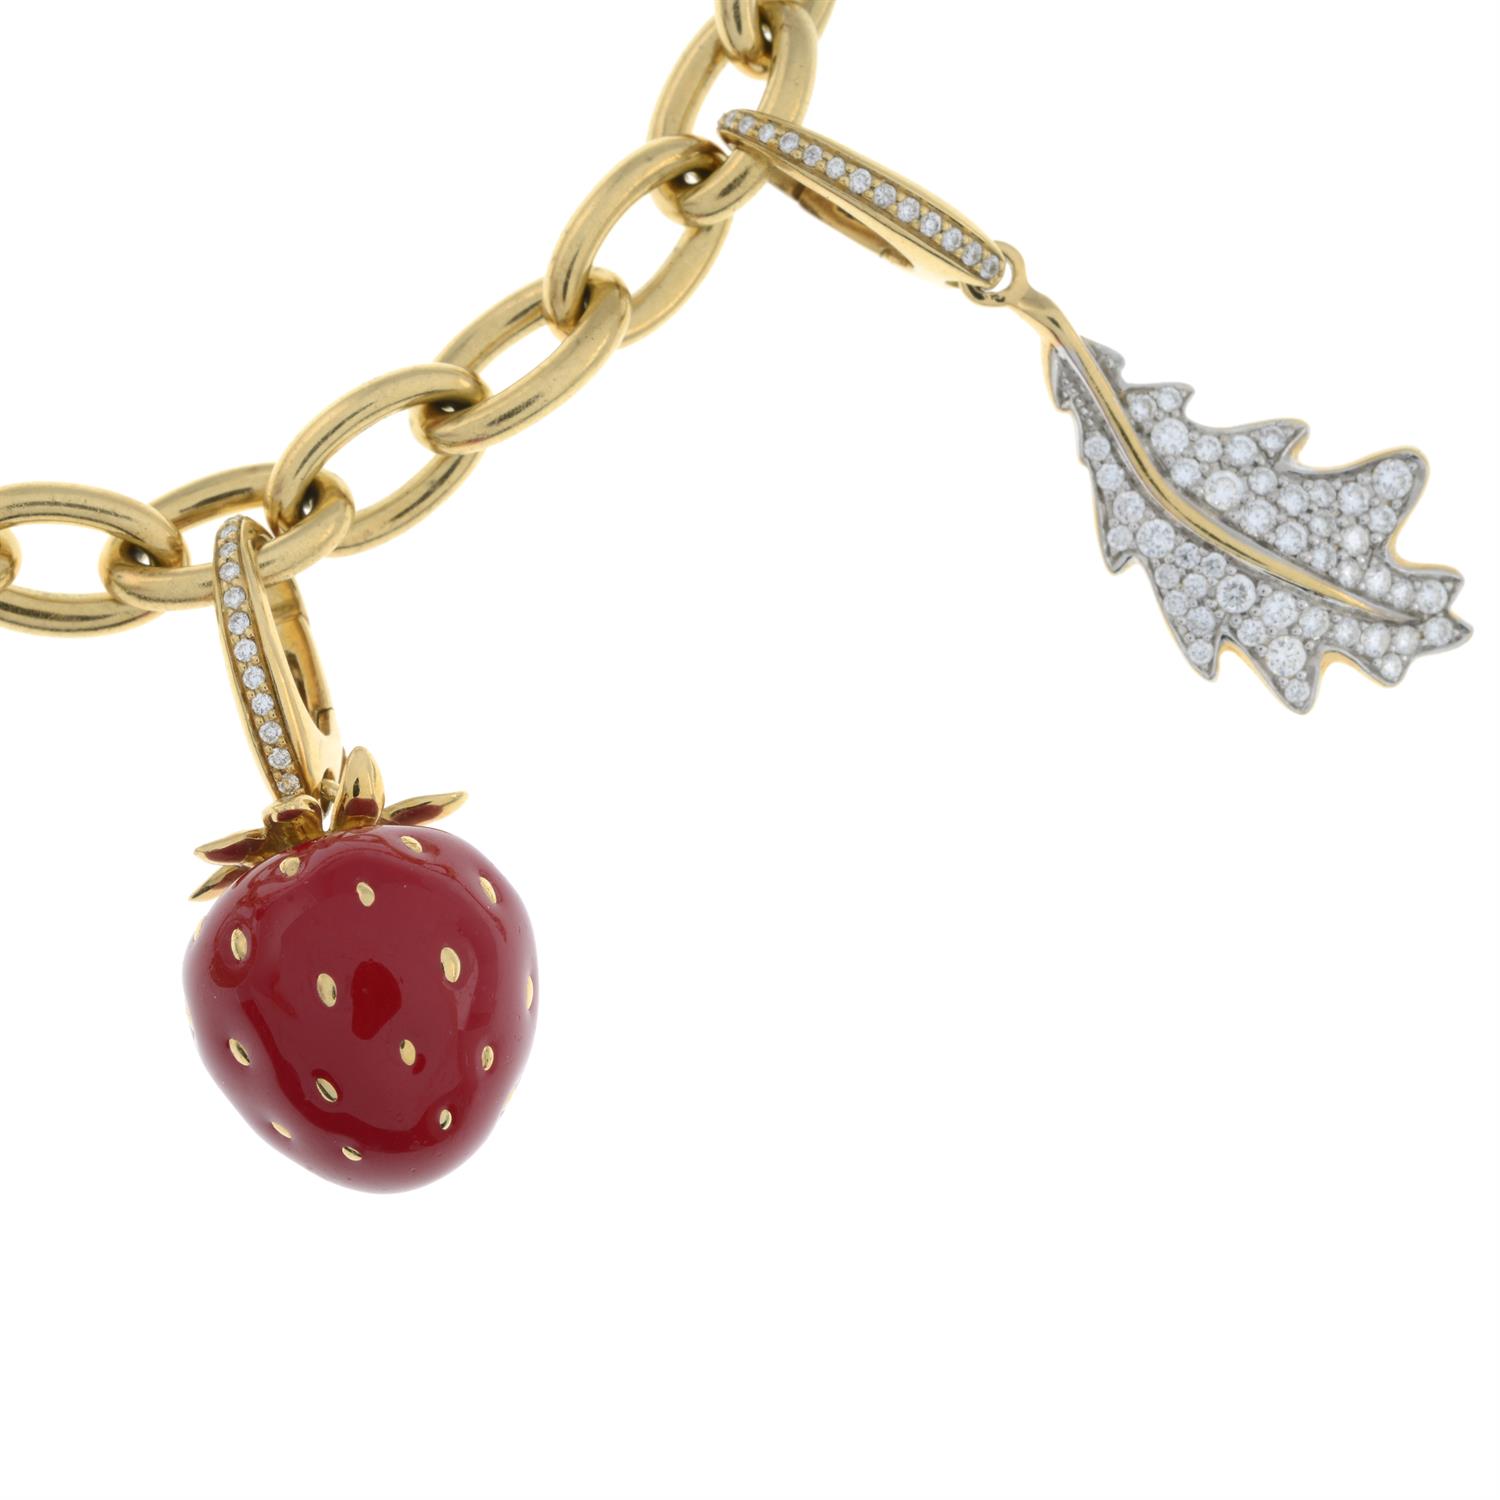 18ct gold bracelet and four charms, by Asprey - Image 5 of 7